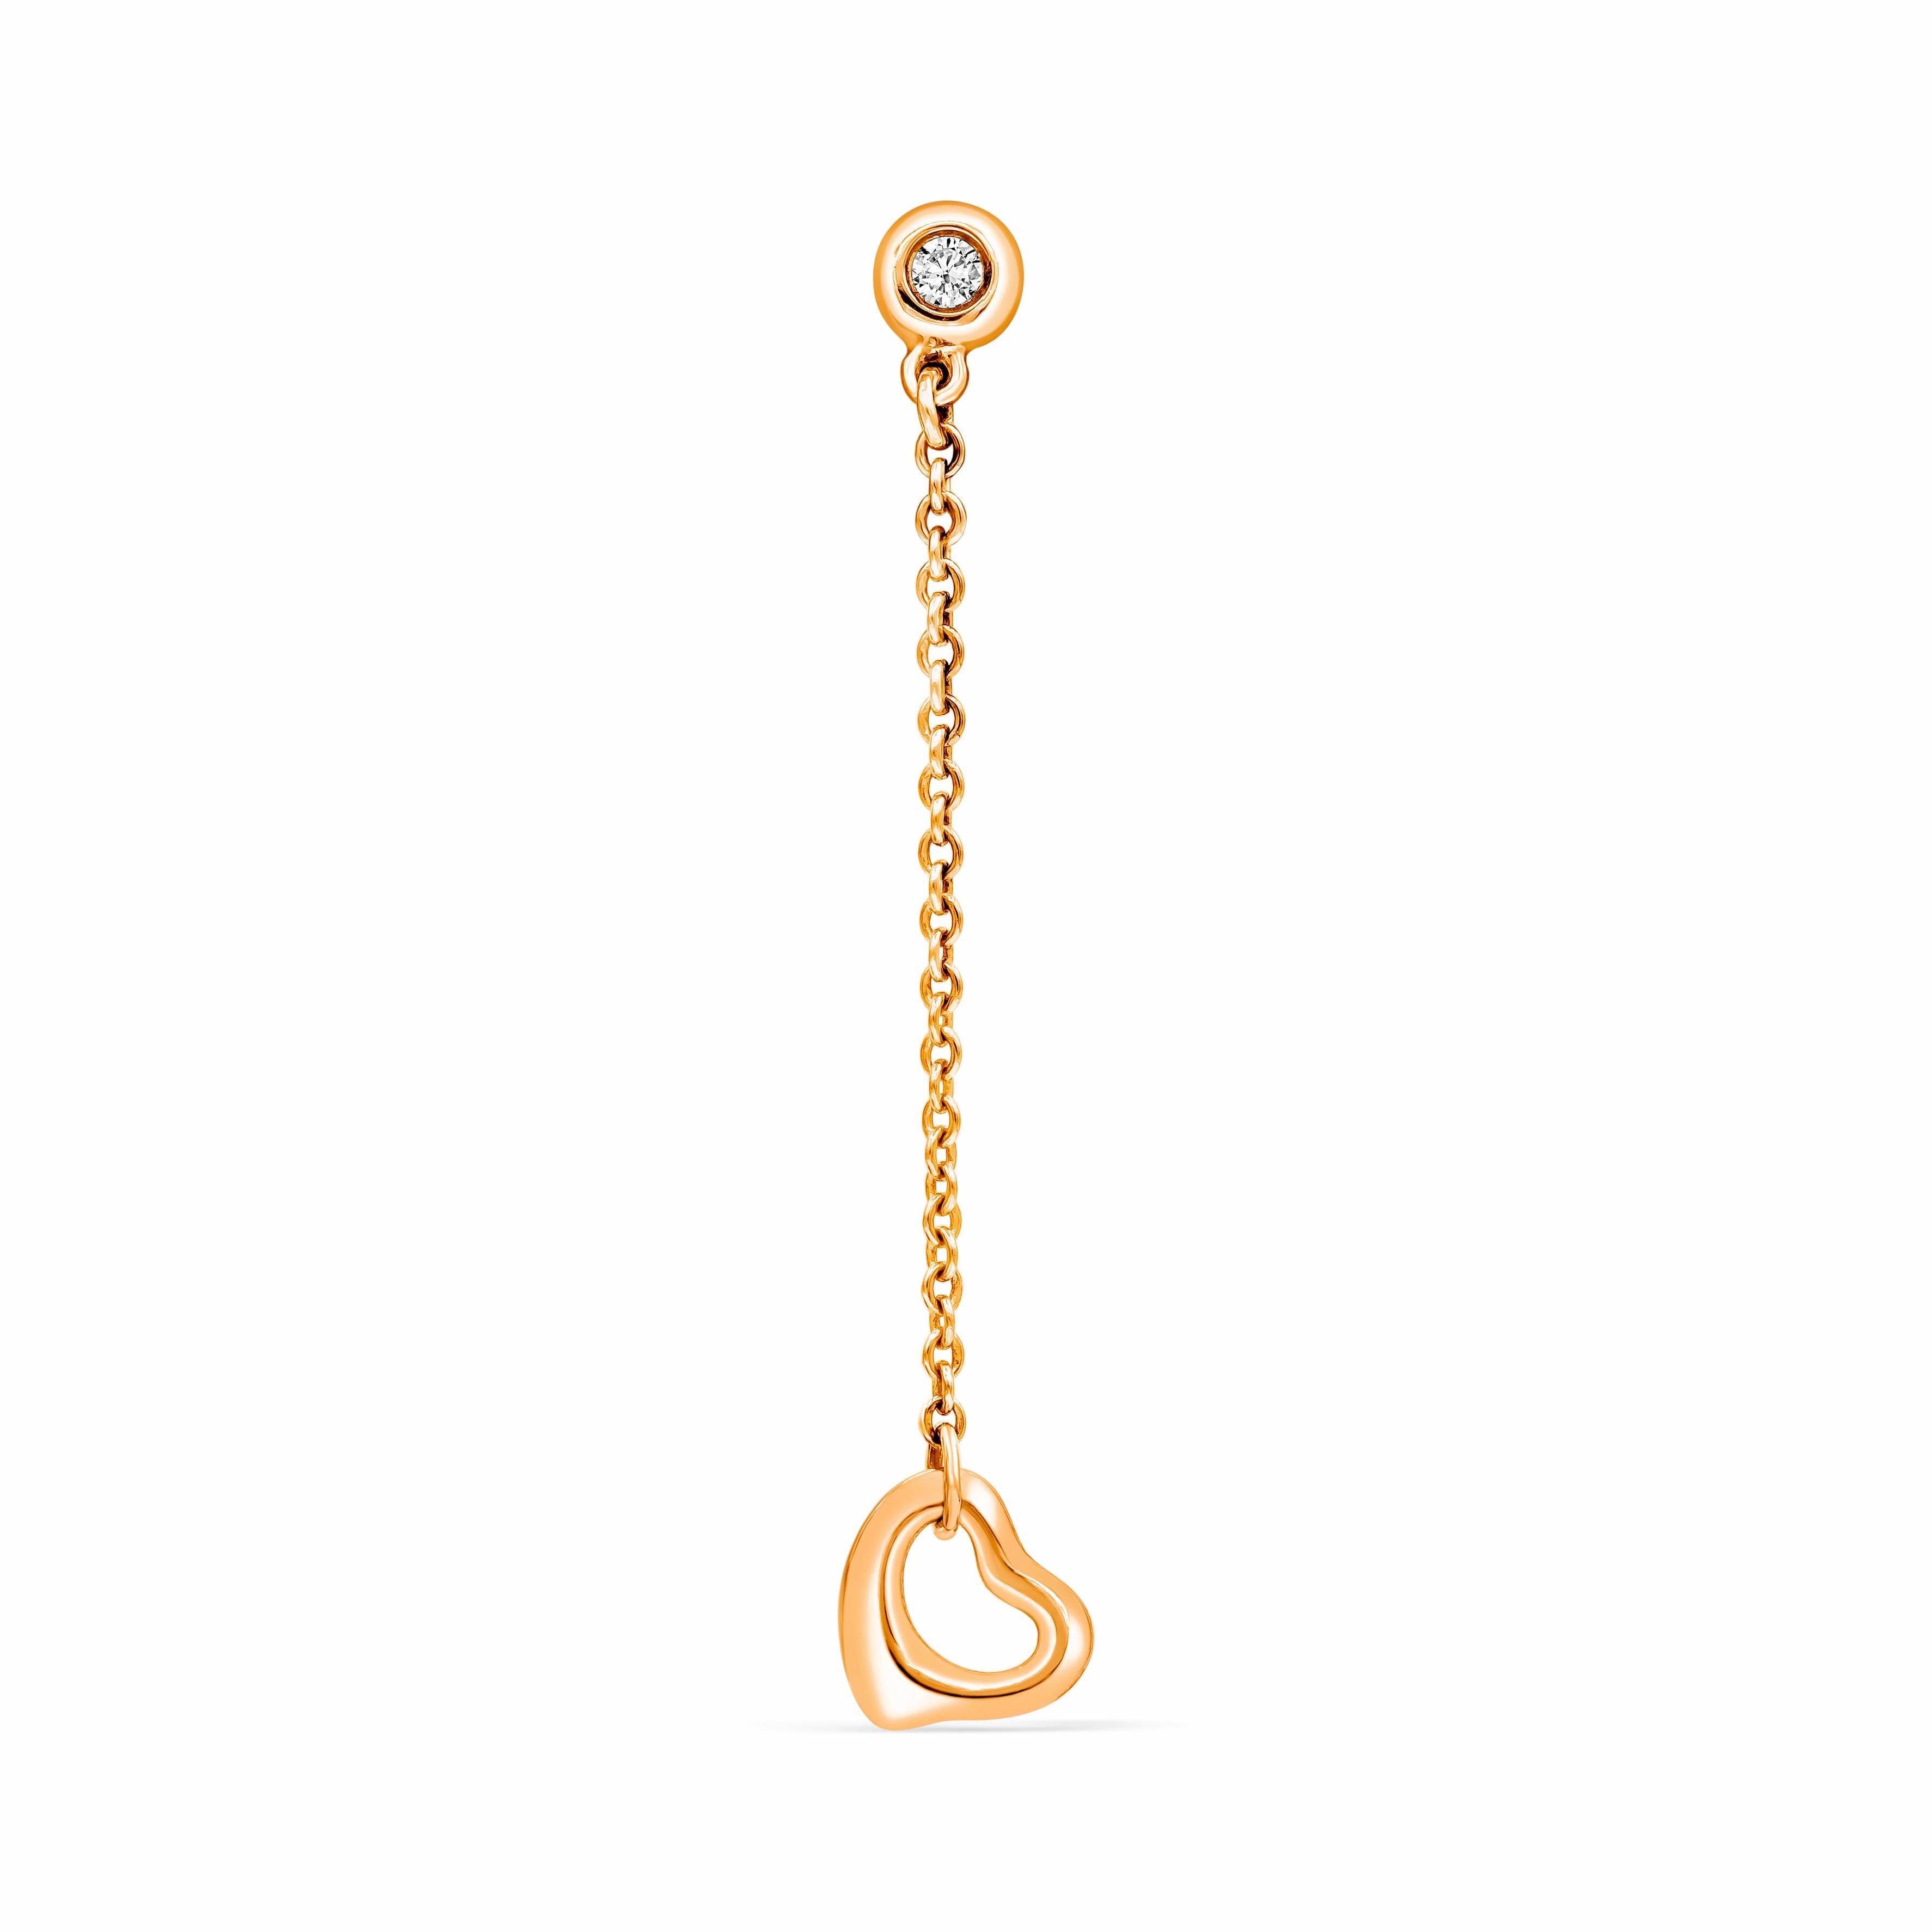 Drop earrings made in 18 karat rose gold suspending two, rose gold open hearts approximately 7 millimeters. A bezel set round diamond elegantly holds the open heart drop. Designed by Elsa Peretti for Tiffany & Co.